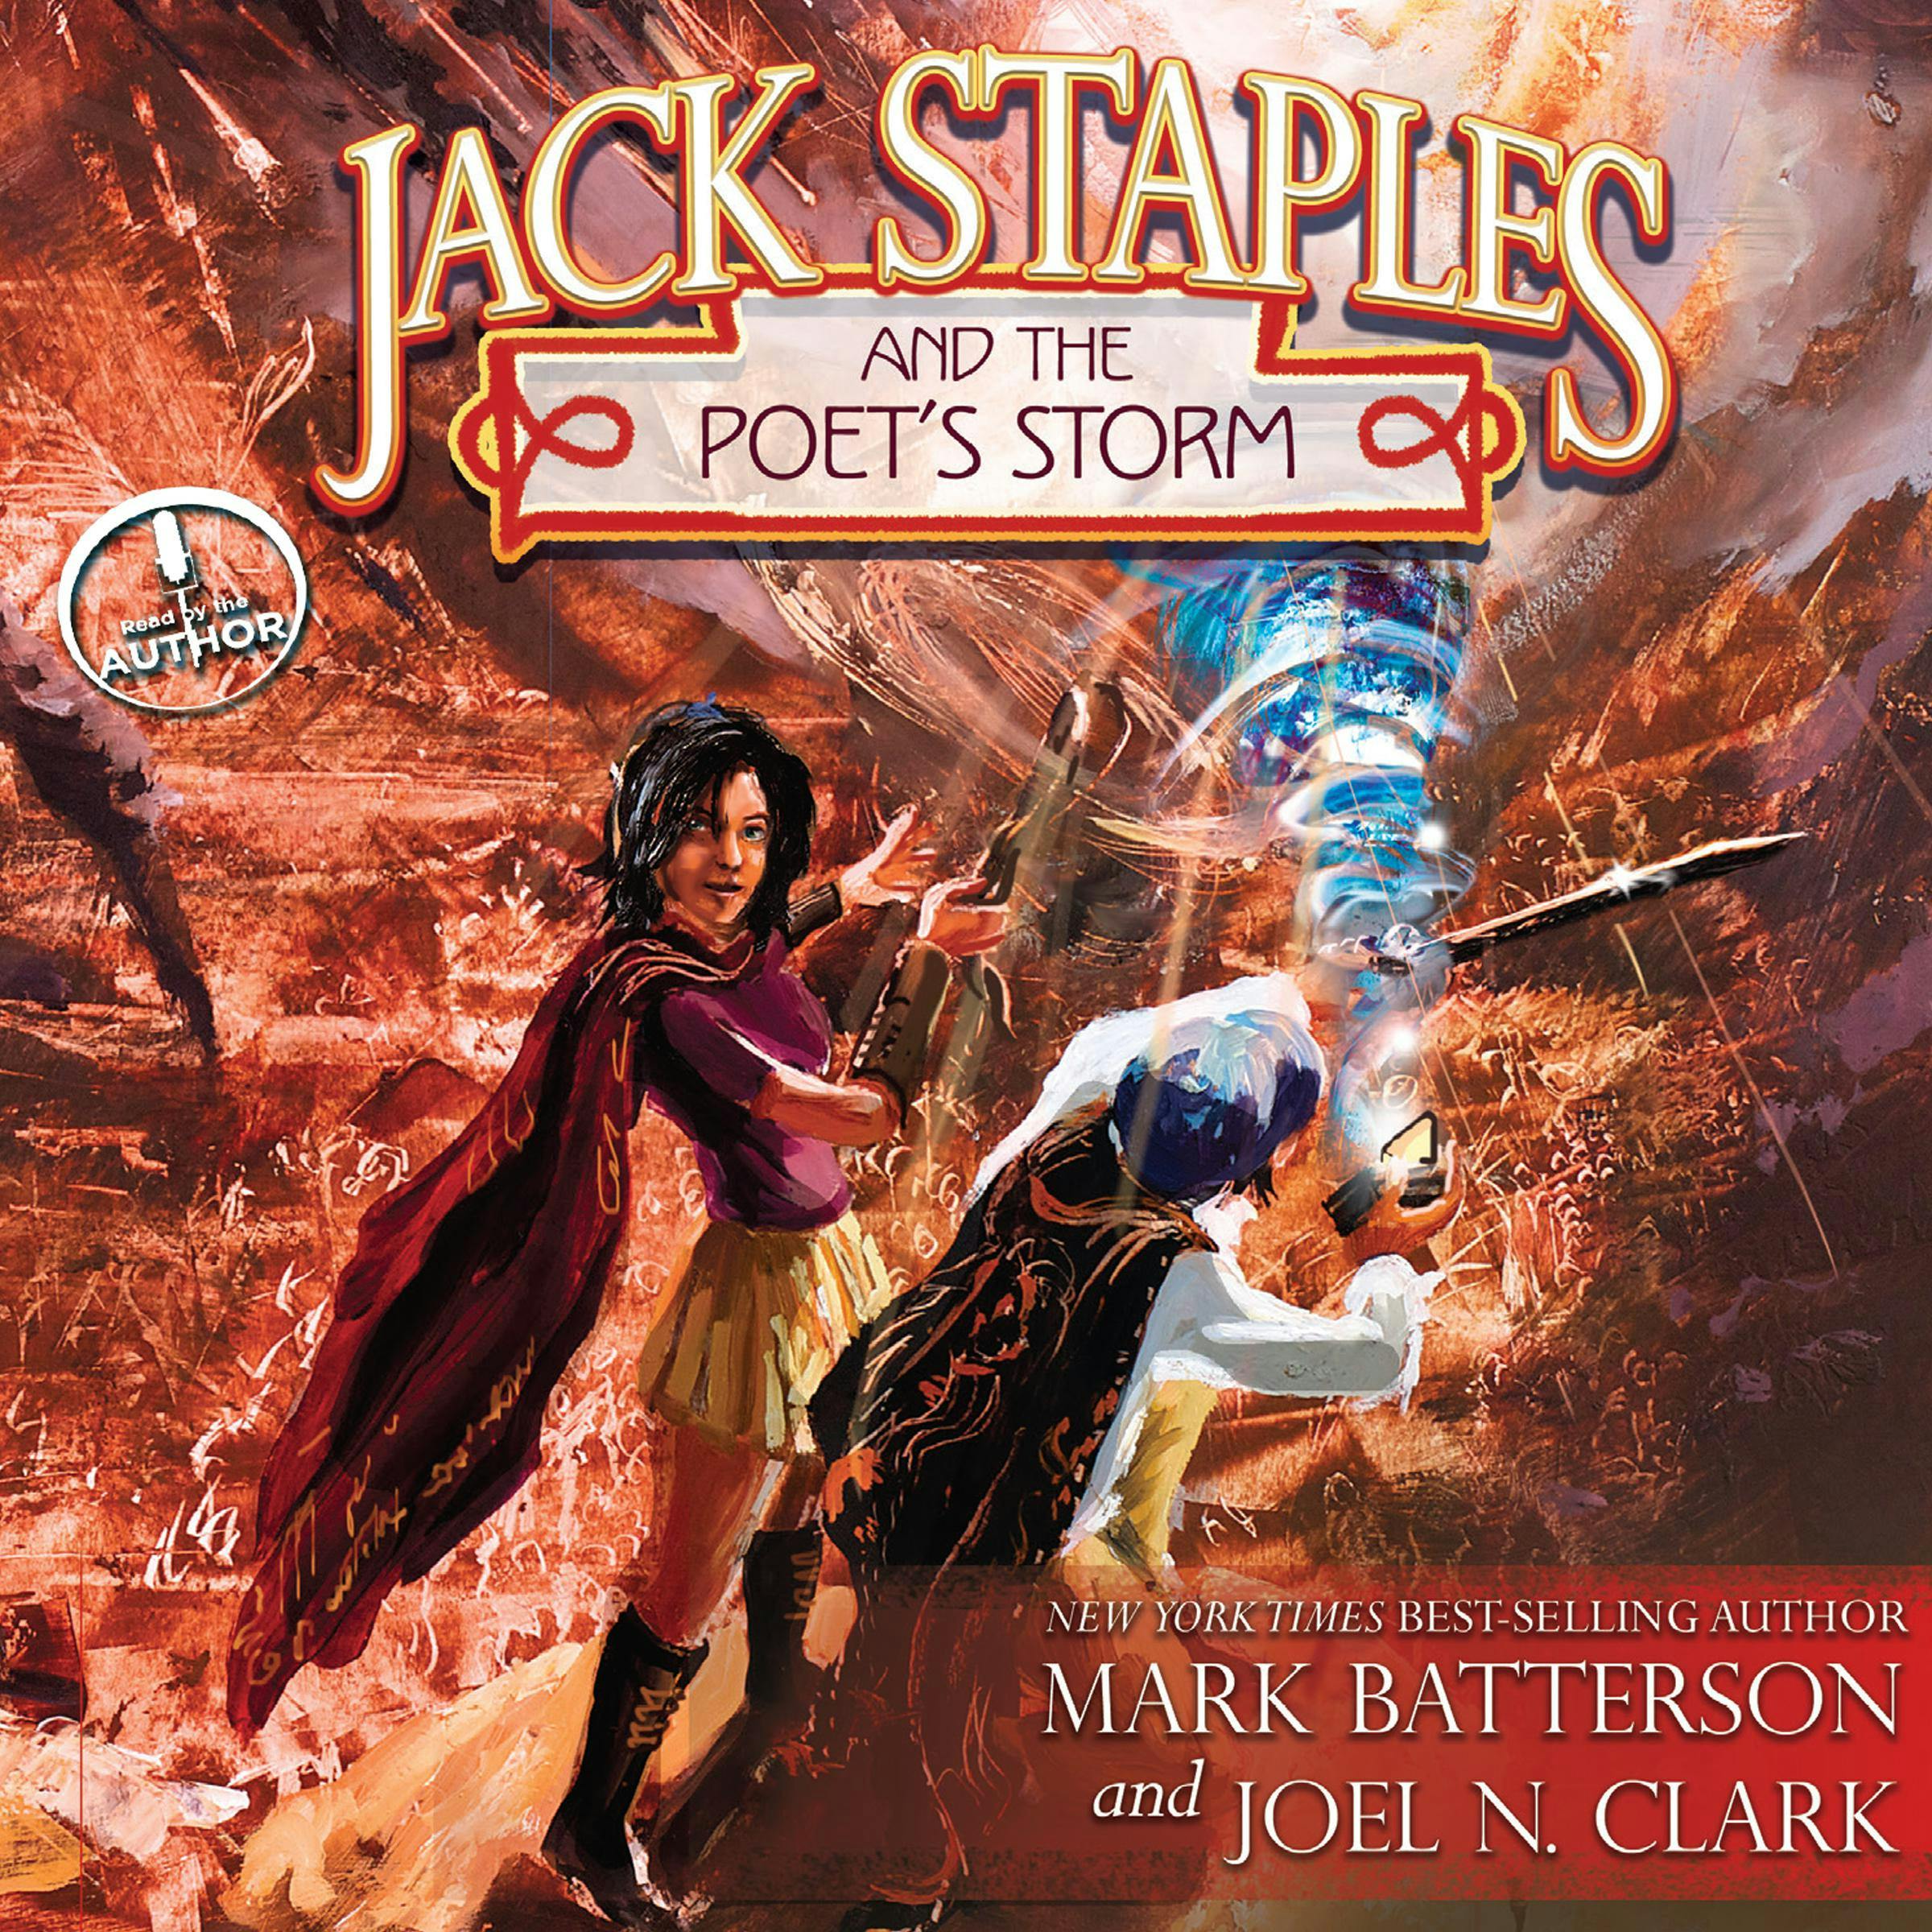 Jack Staples and the Poet's Storm - undefined